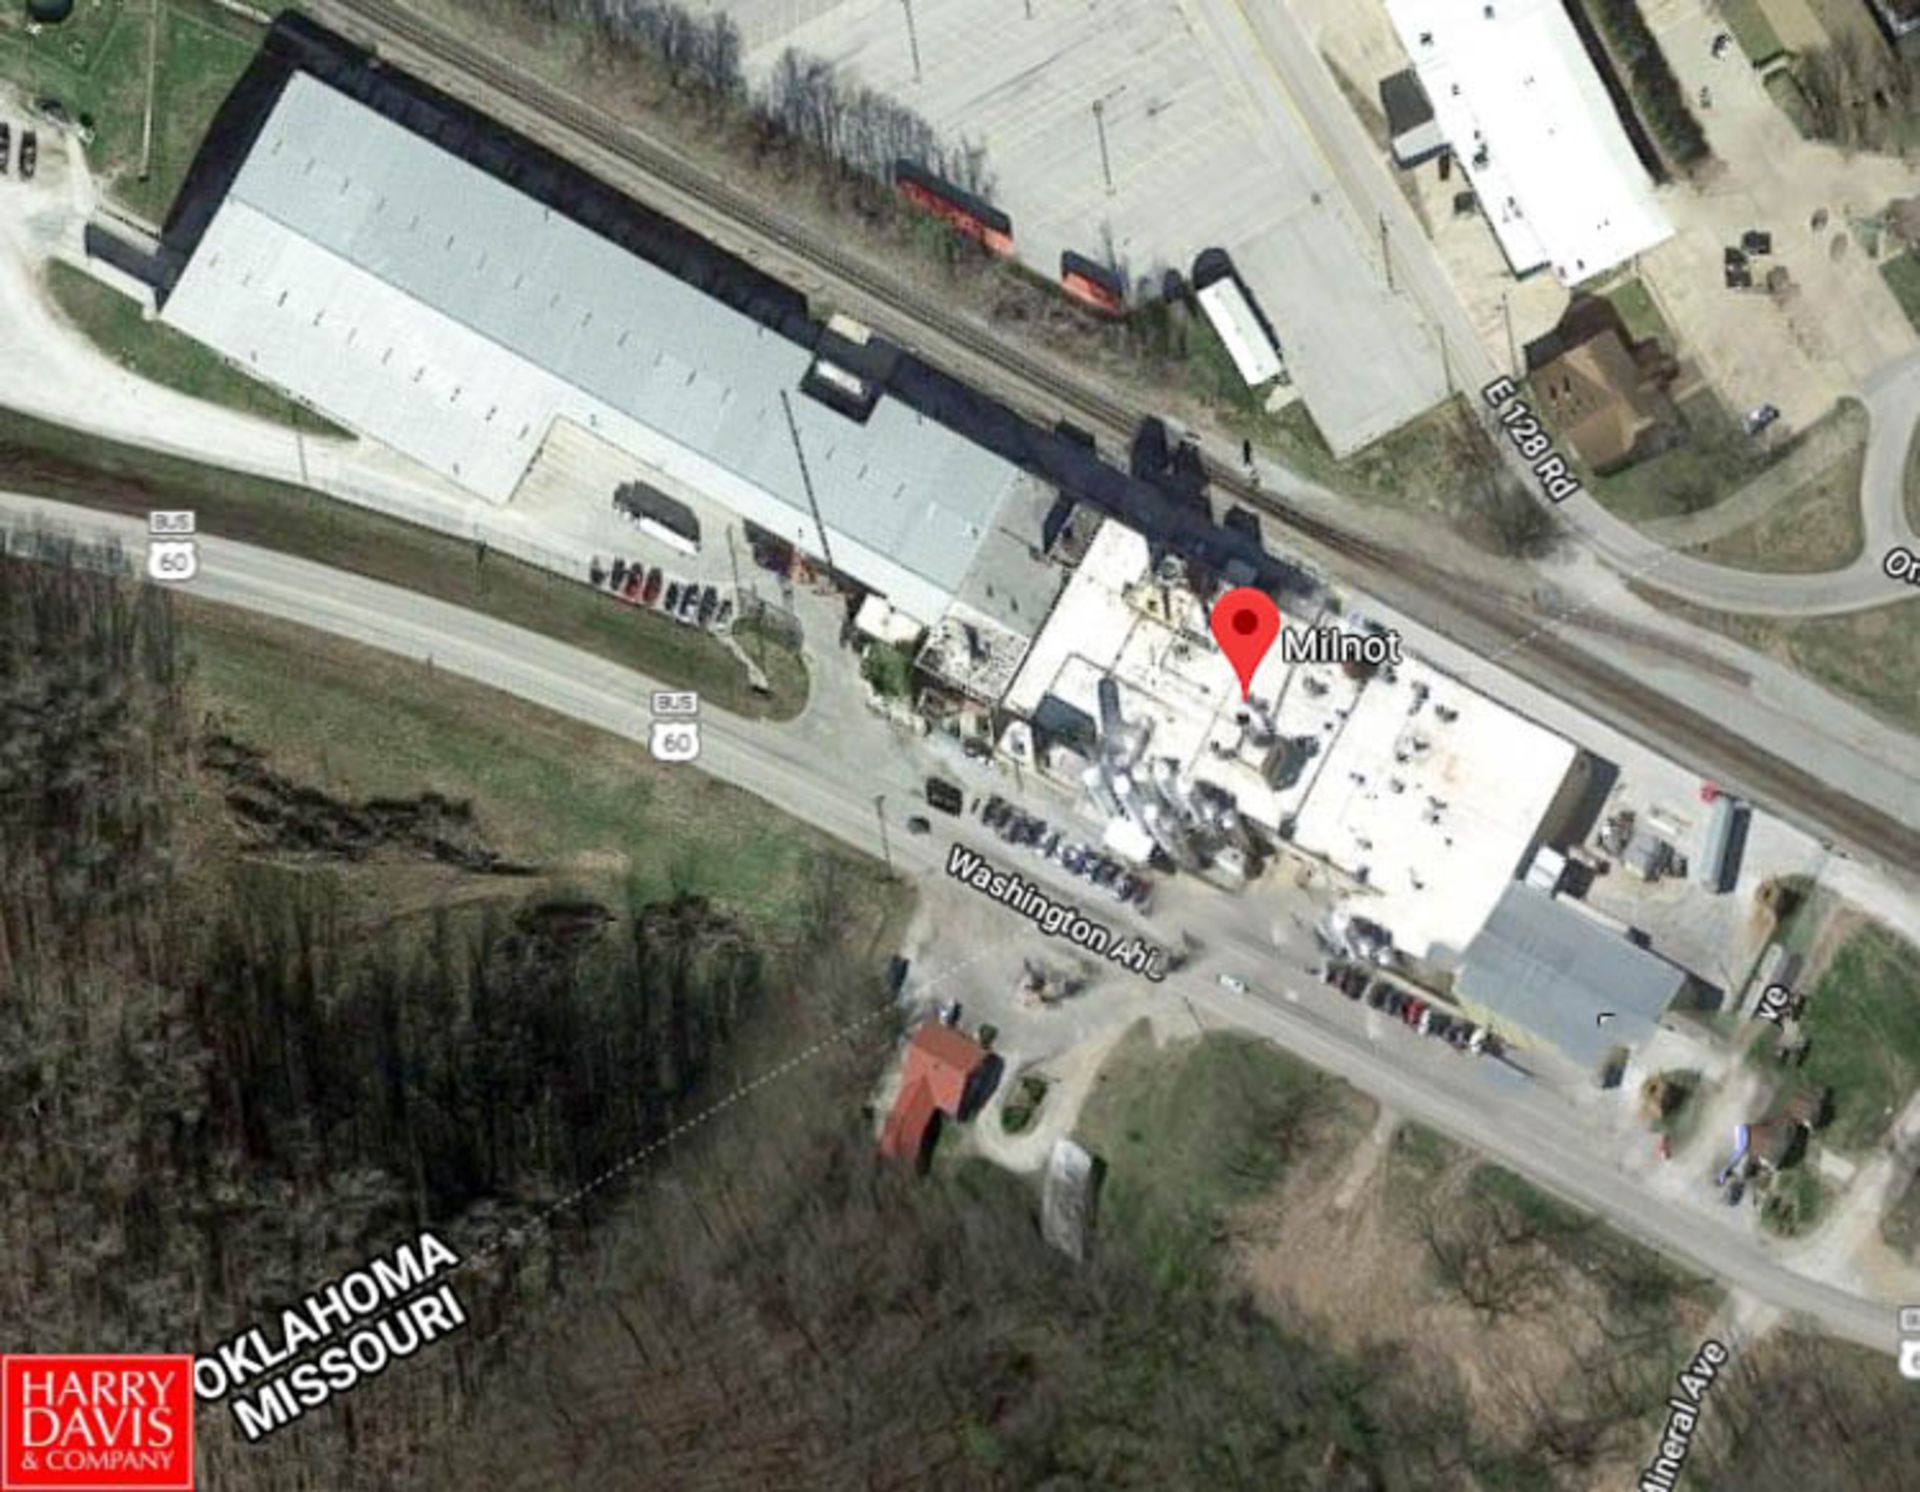 Real Estate - Former Dairy Processing Plant & Warehouse - 33 Acres - Image 4 of 27